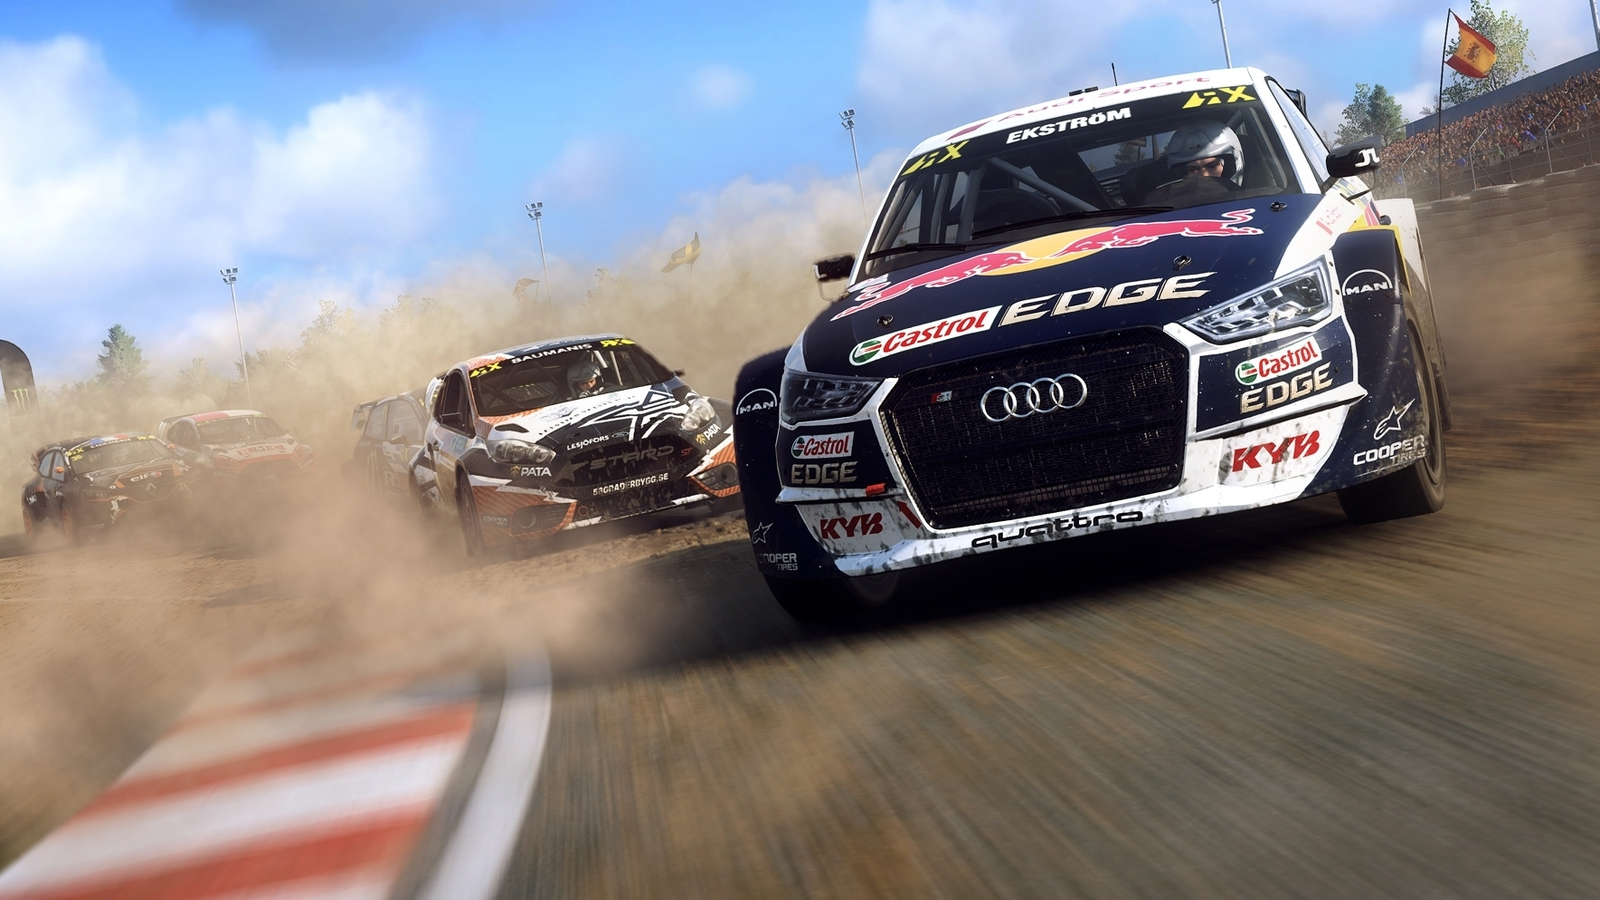 Dirt Rally 2.0 Review